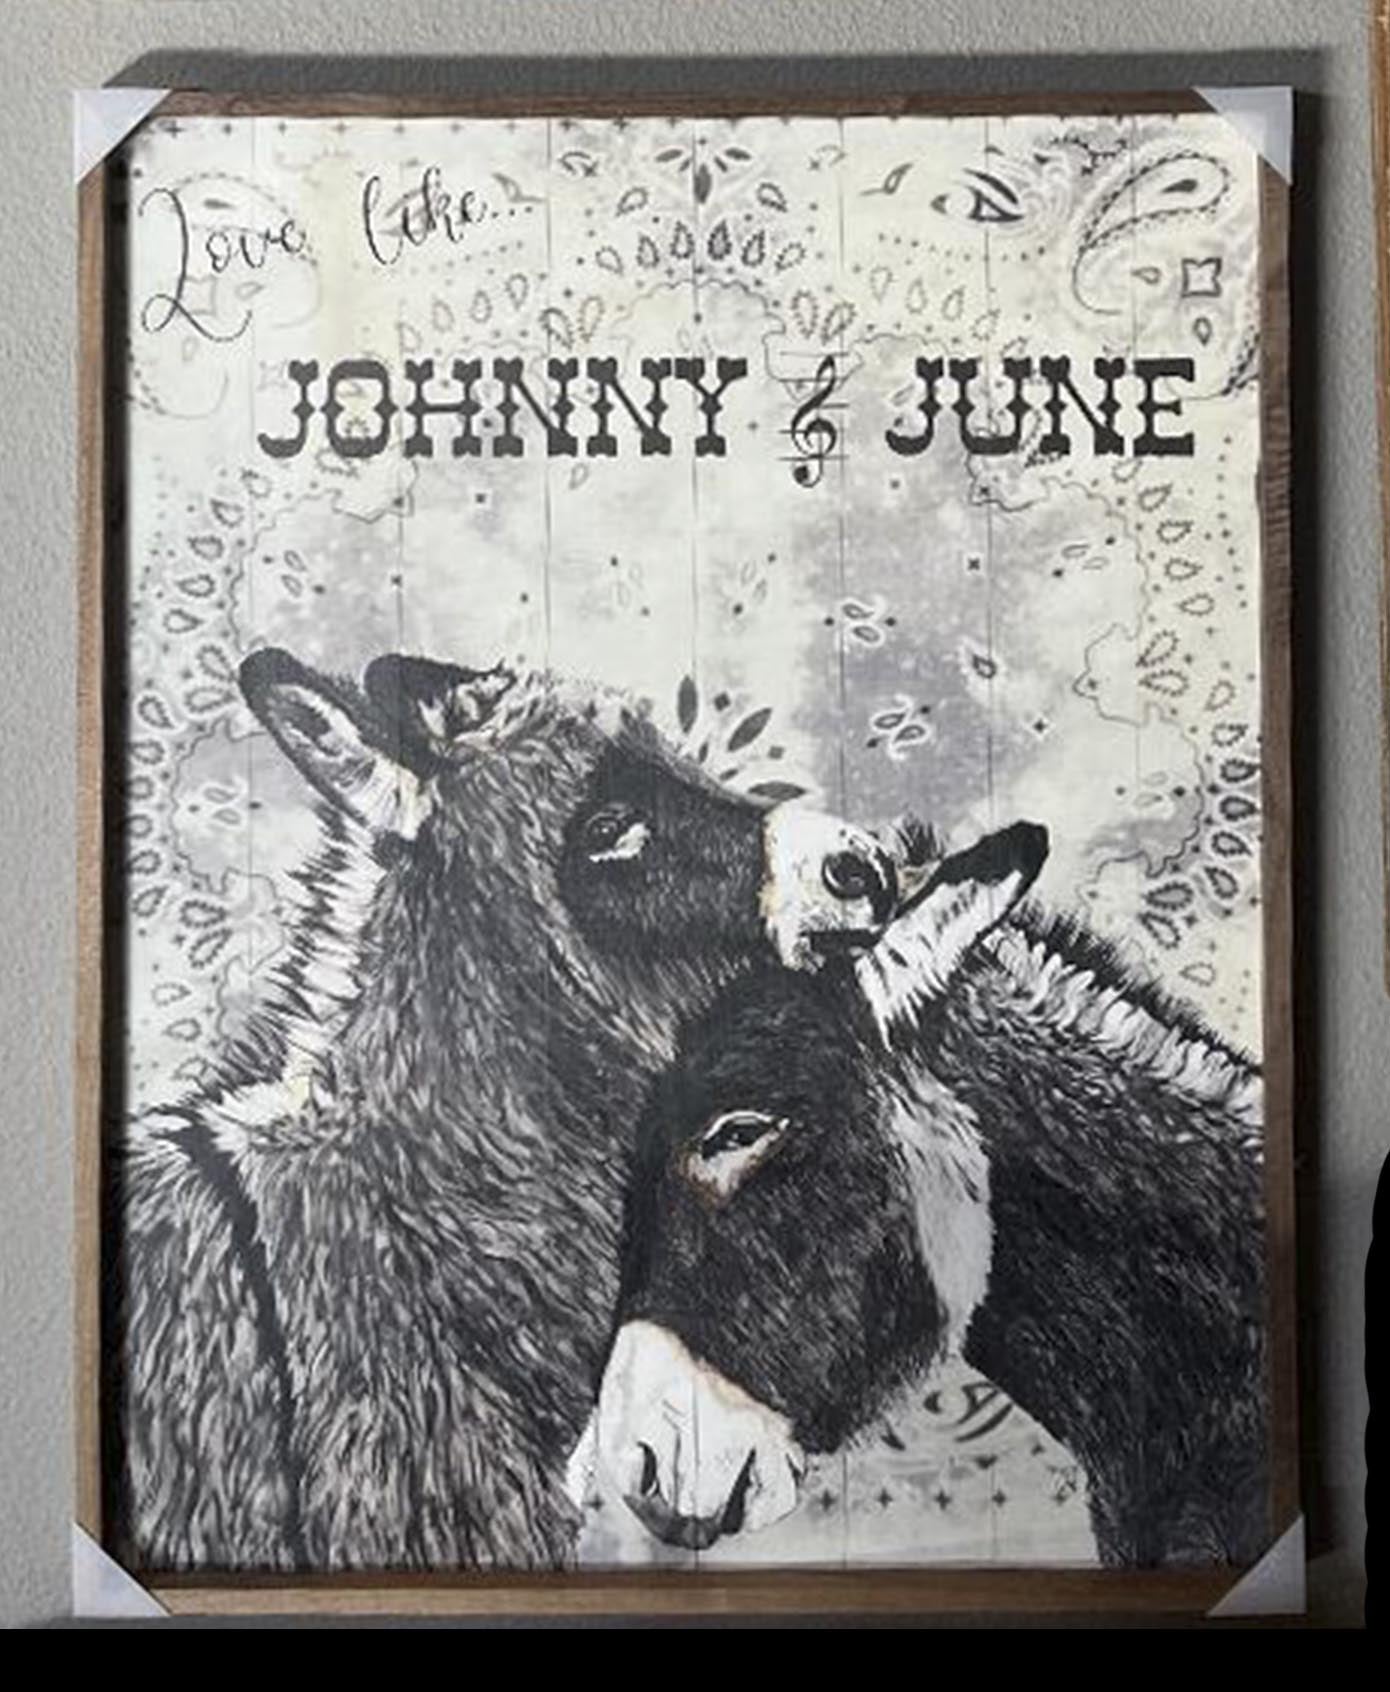 Wall Art 24x30 - Johnny and June (with text and bandana background)